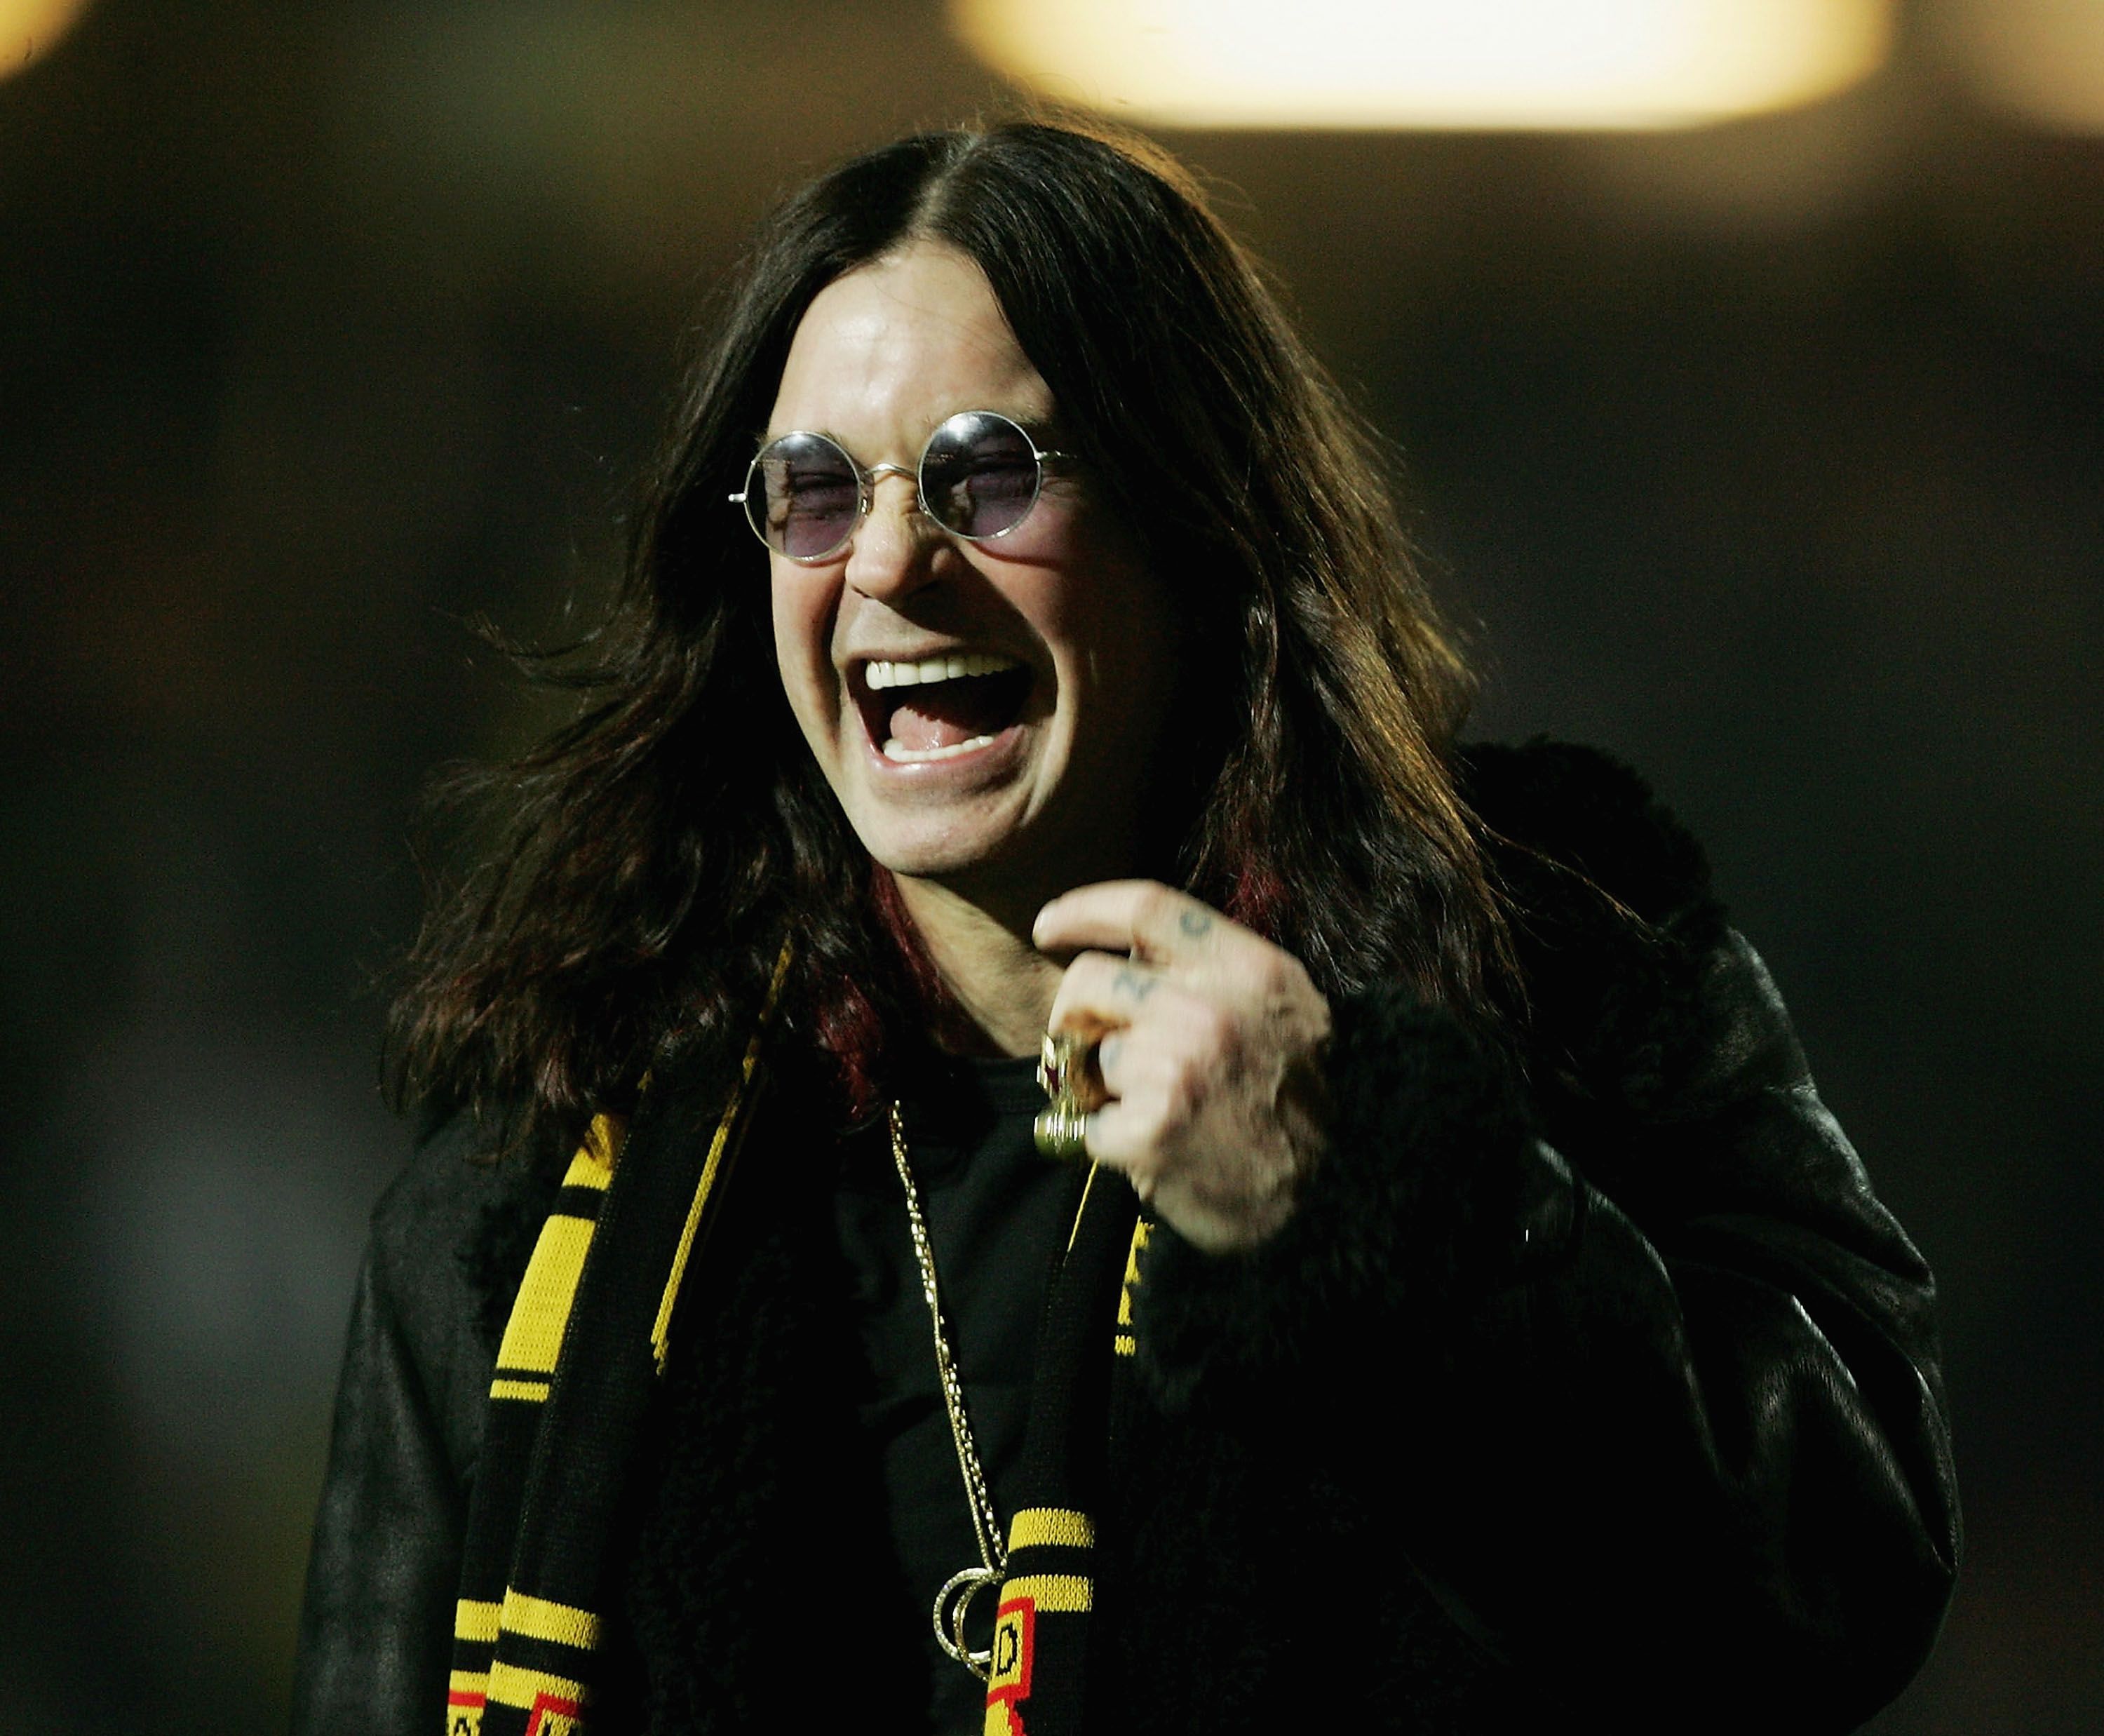 Ozzy Osbourne during the Carling Cup Quarter final match between Watford and Portsmouth at Vicarage Road on November 30, 2004 in Watford, England. | Source: Getty Images